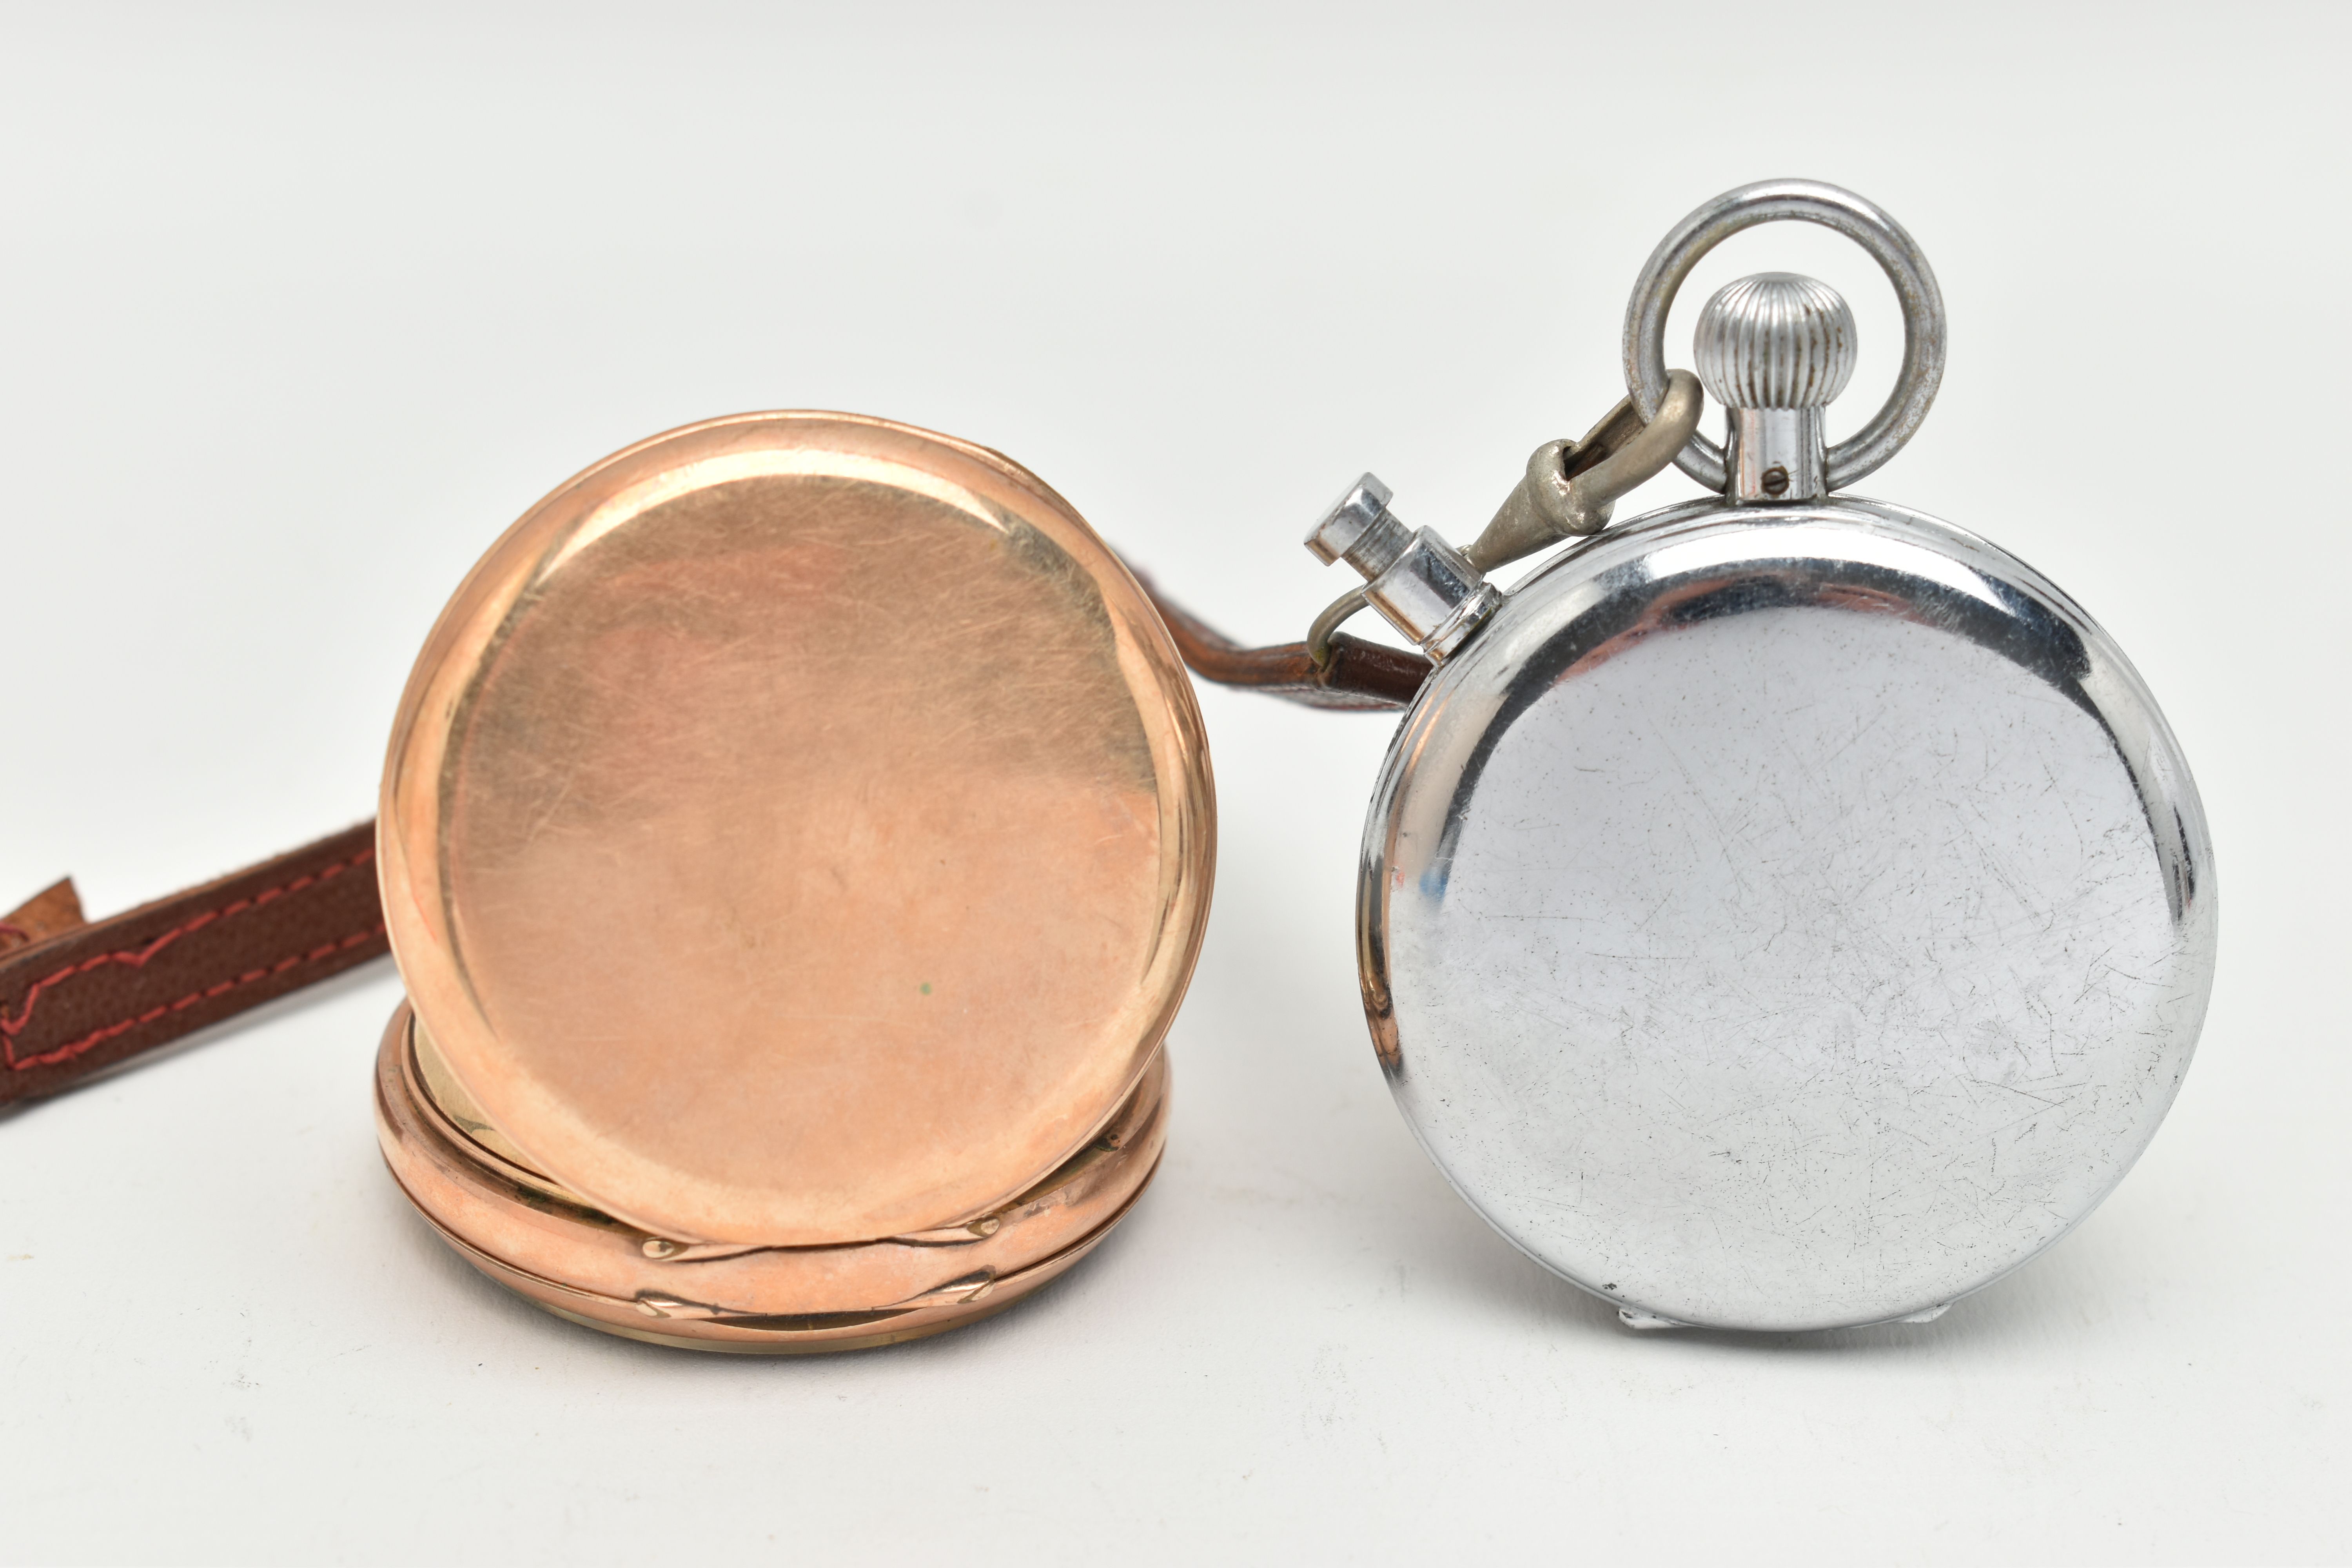 A ROLLED GOLD OPEN FACE POCKET WATCH AND A STOP WATCH, manual wind pocket watch, round white dial - Image 2 of 4